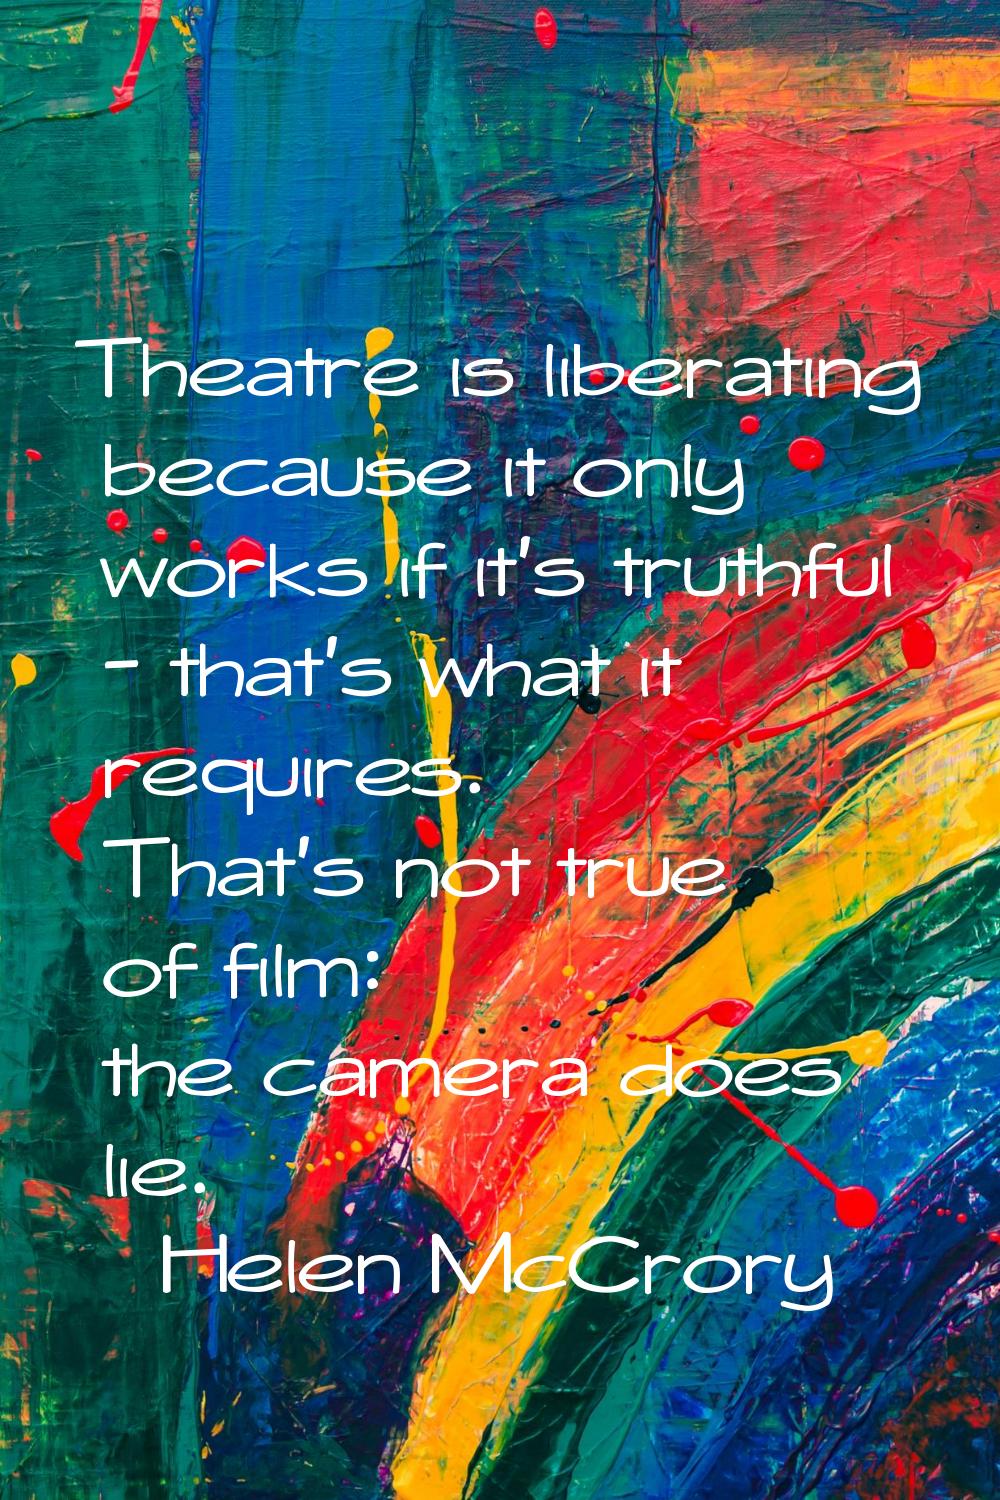 Theatre is liberating because it only works if it's truthful - that's what it requires. That's not 